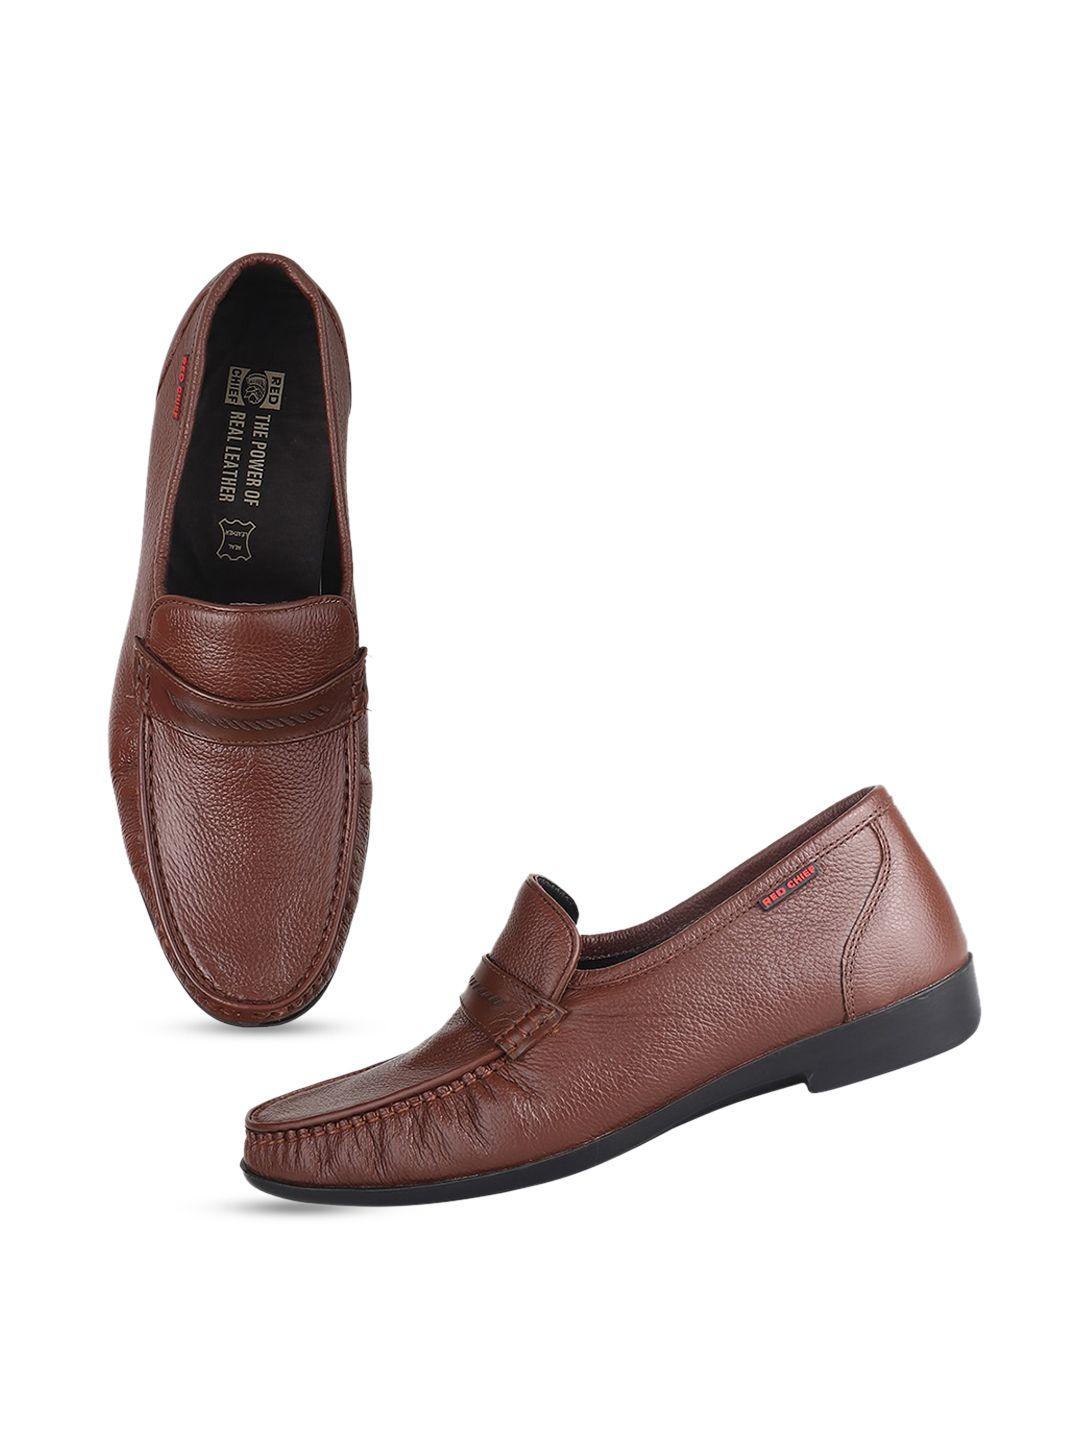 red-chief-men-textured-leather-formal-penny-loafers